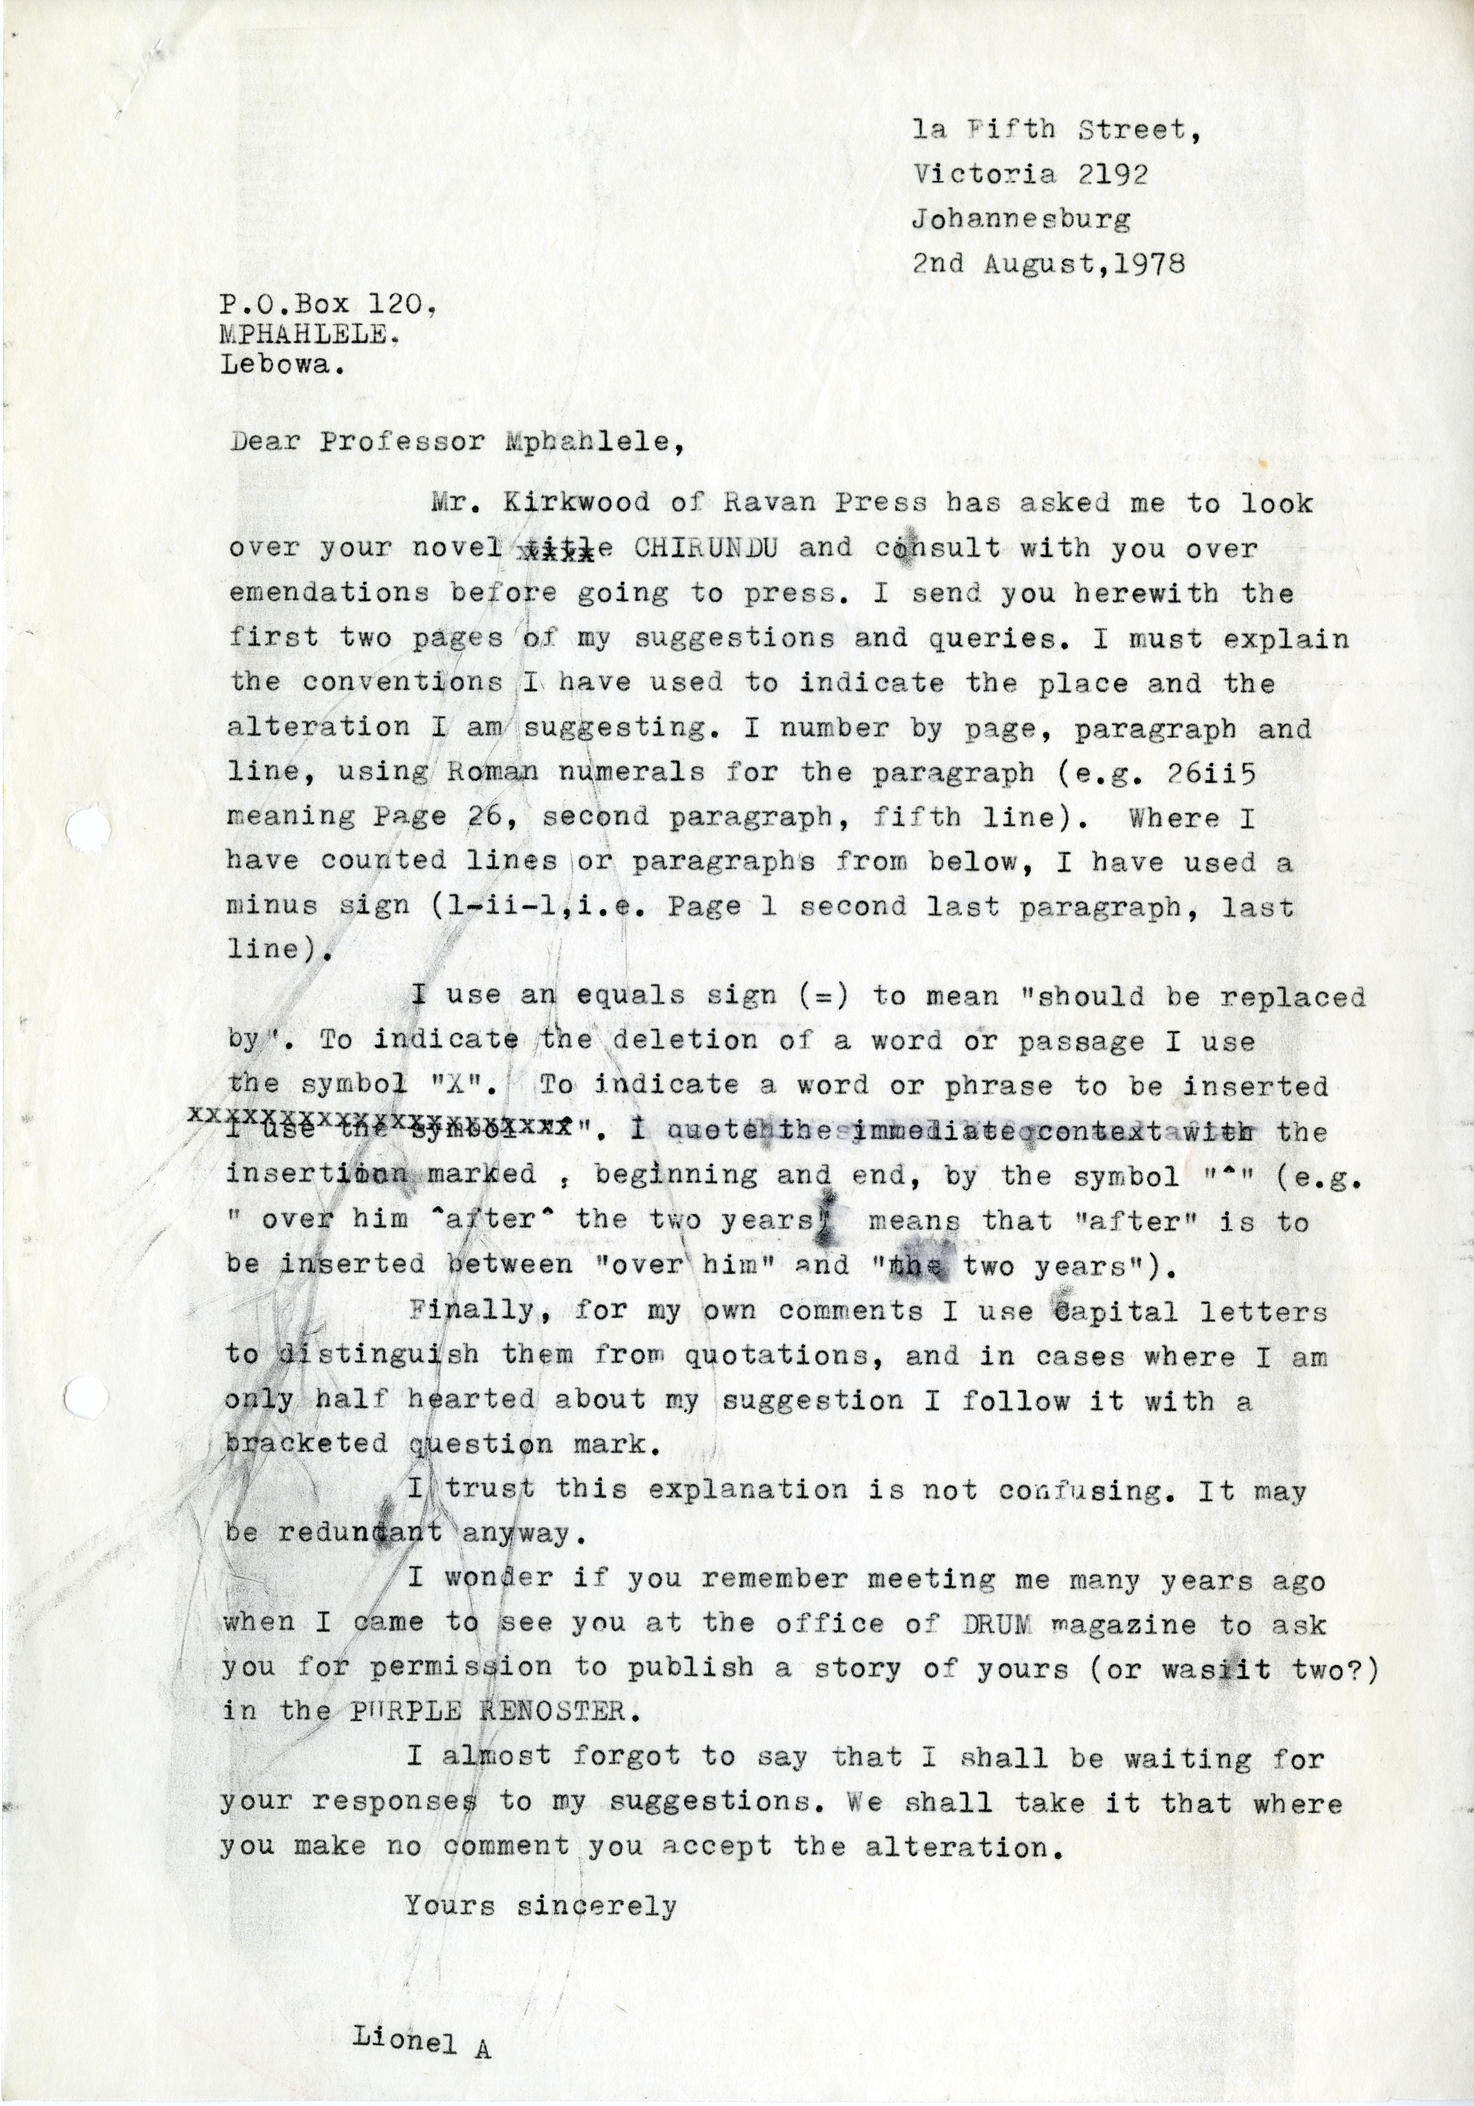 Correspondence between Mphahlele and Lionel Abrahams, who edited Chirundu. Abrahams was a respected South African writer.